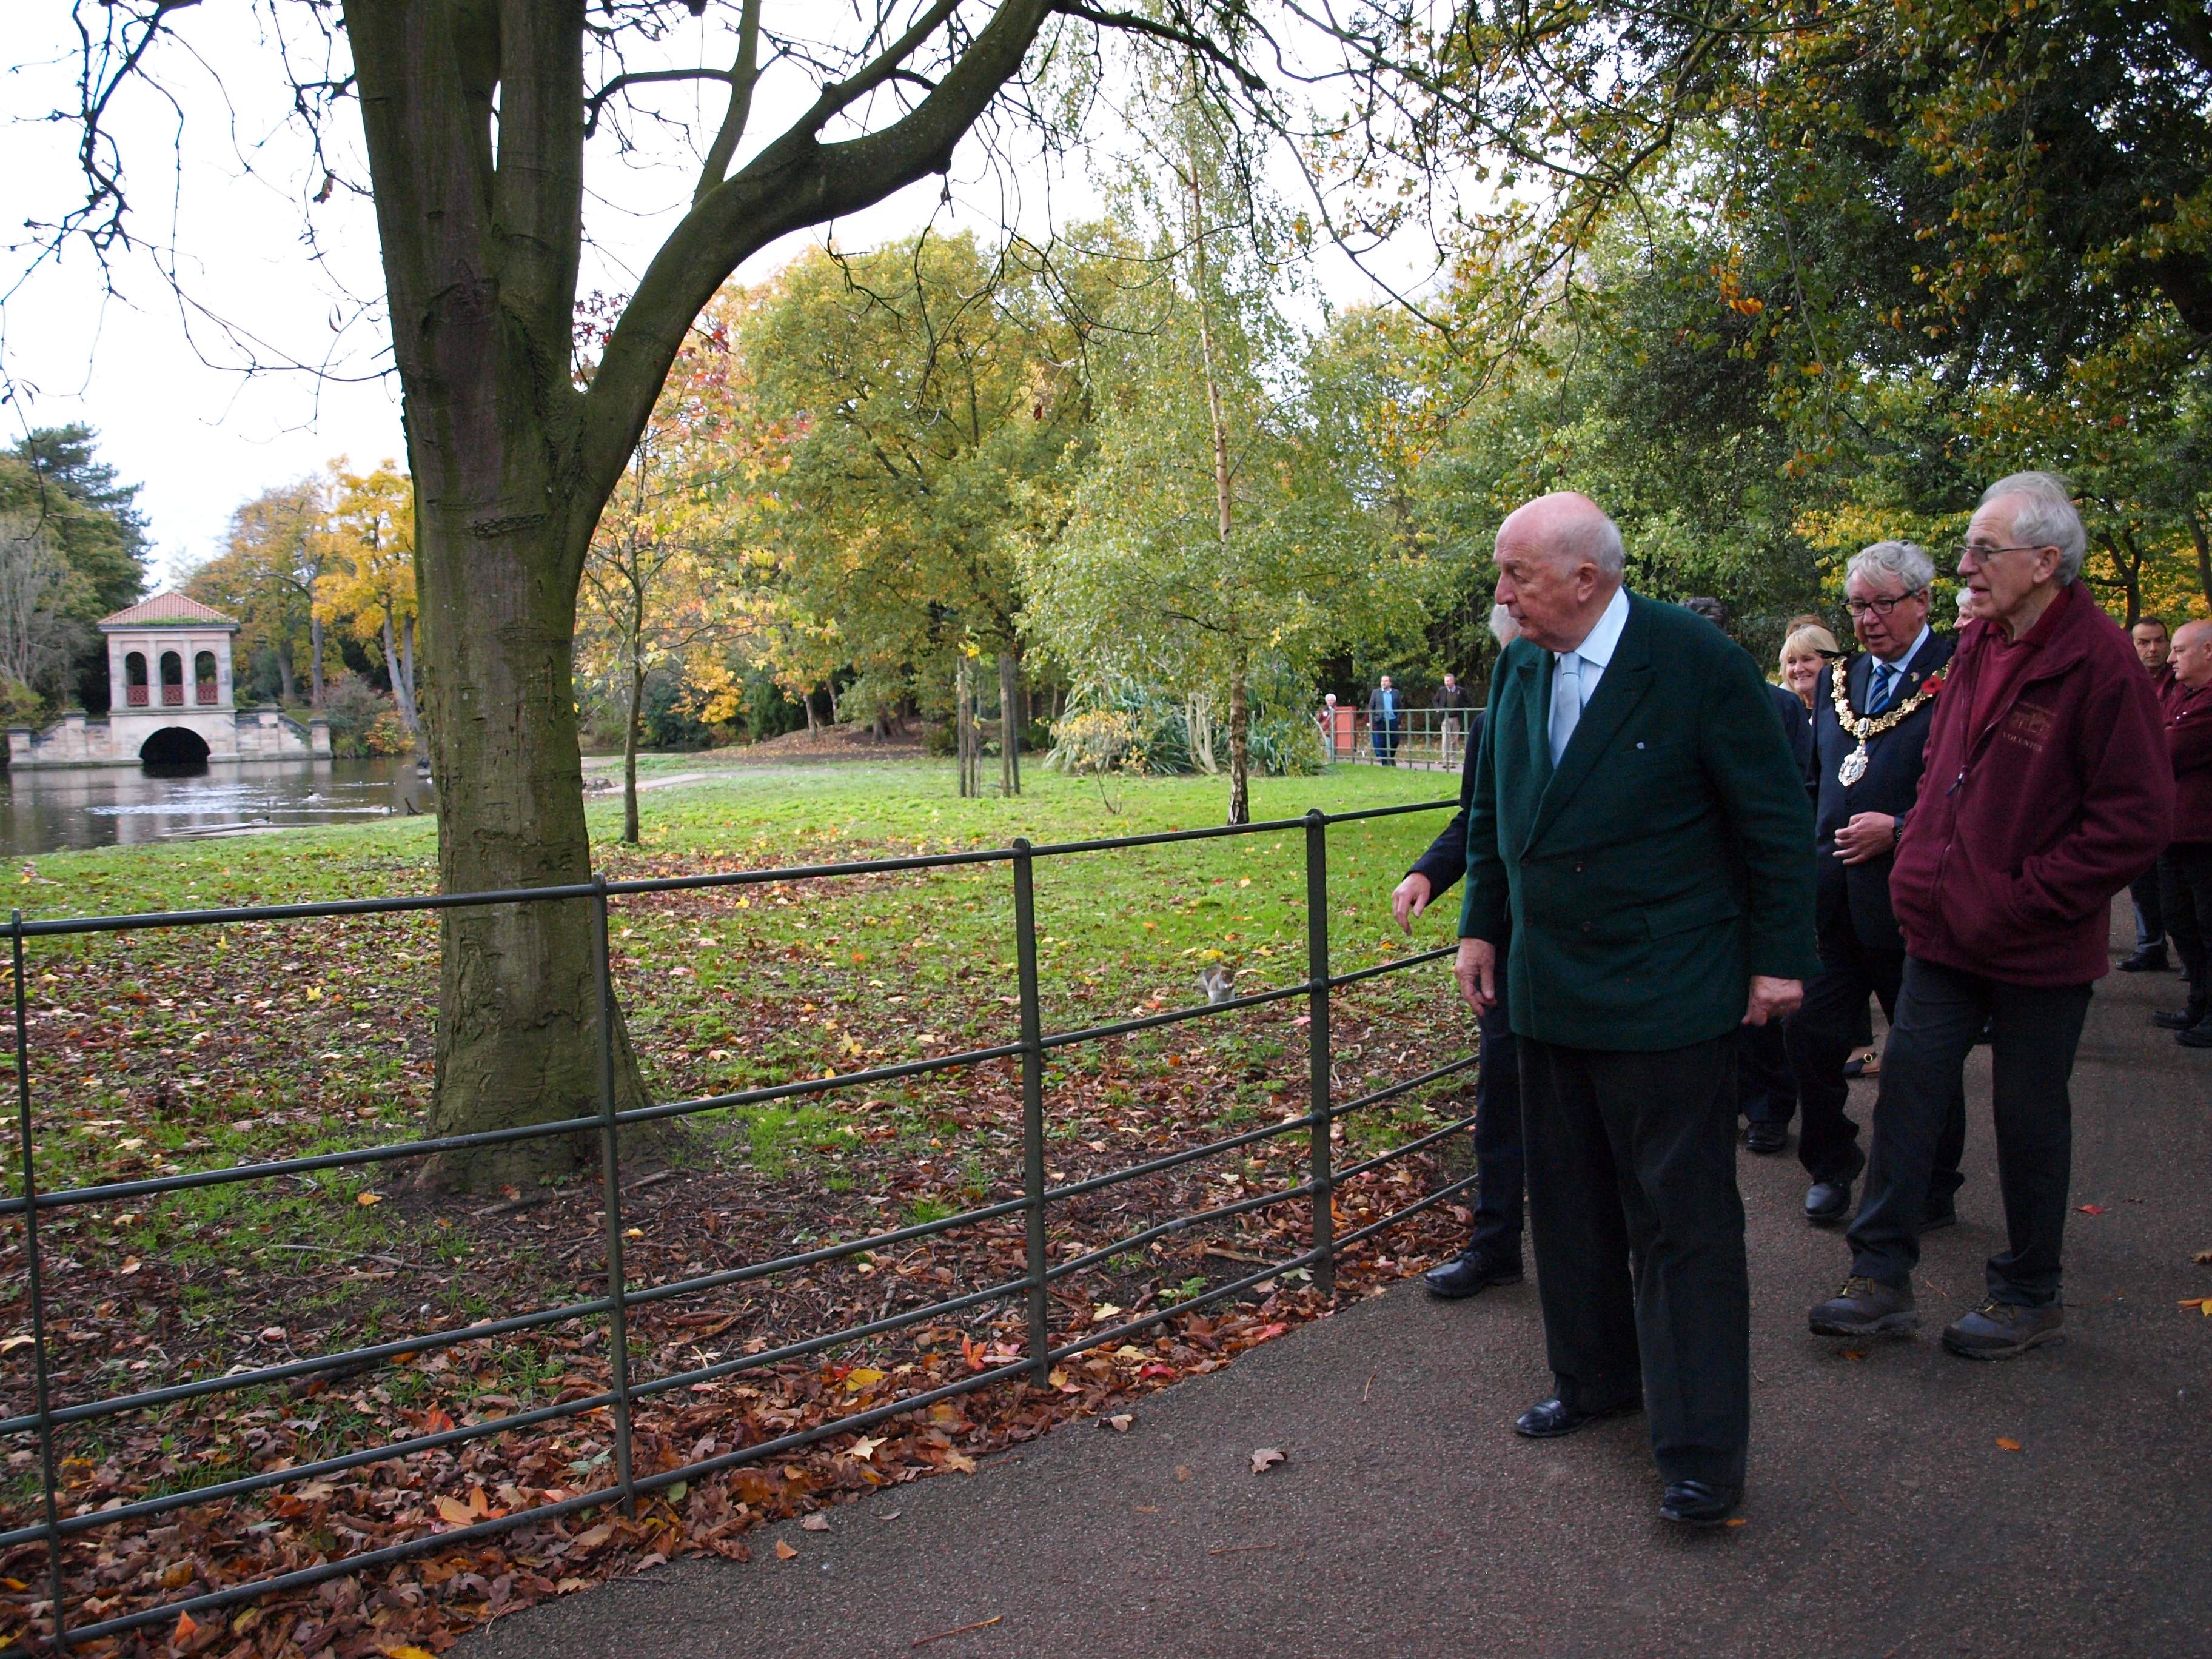 The Duke goes on a brief walk in the Park